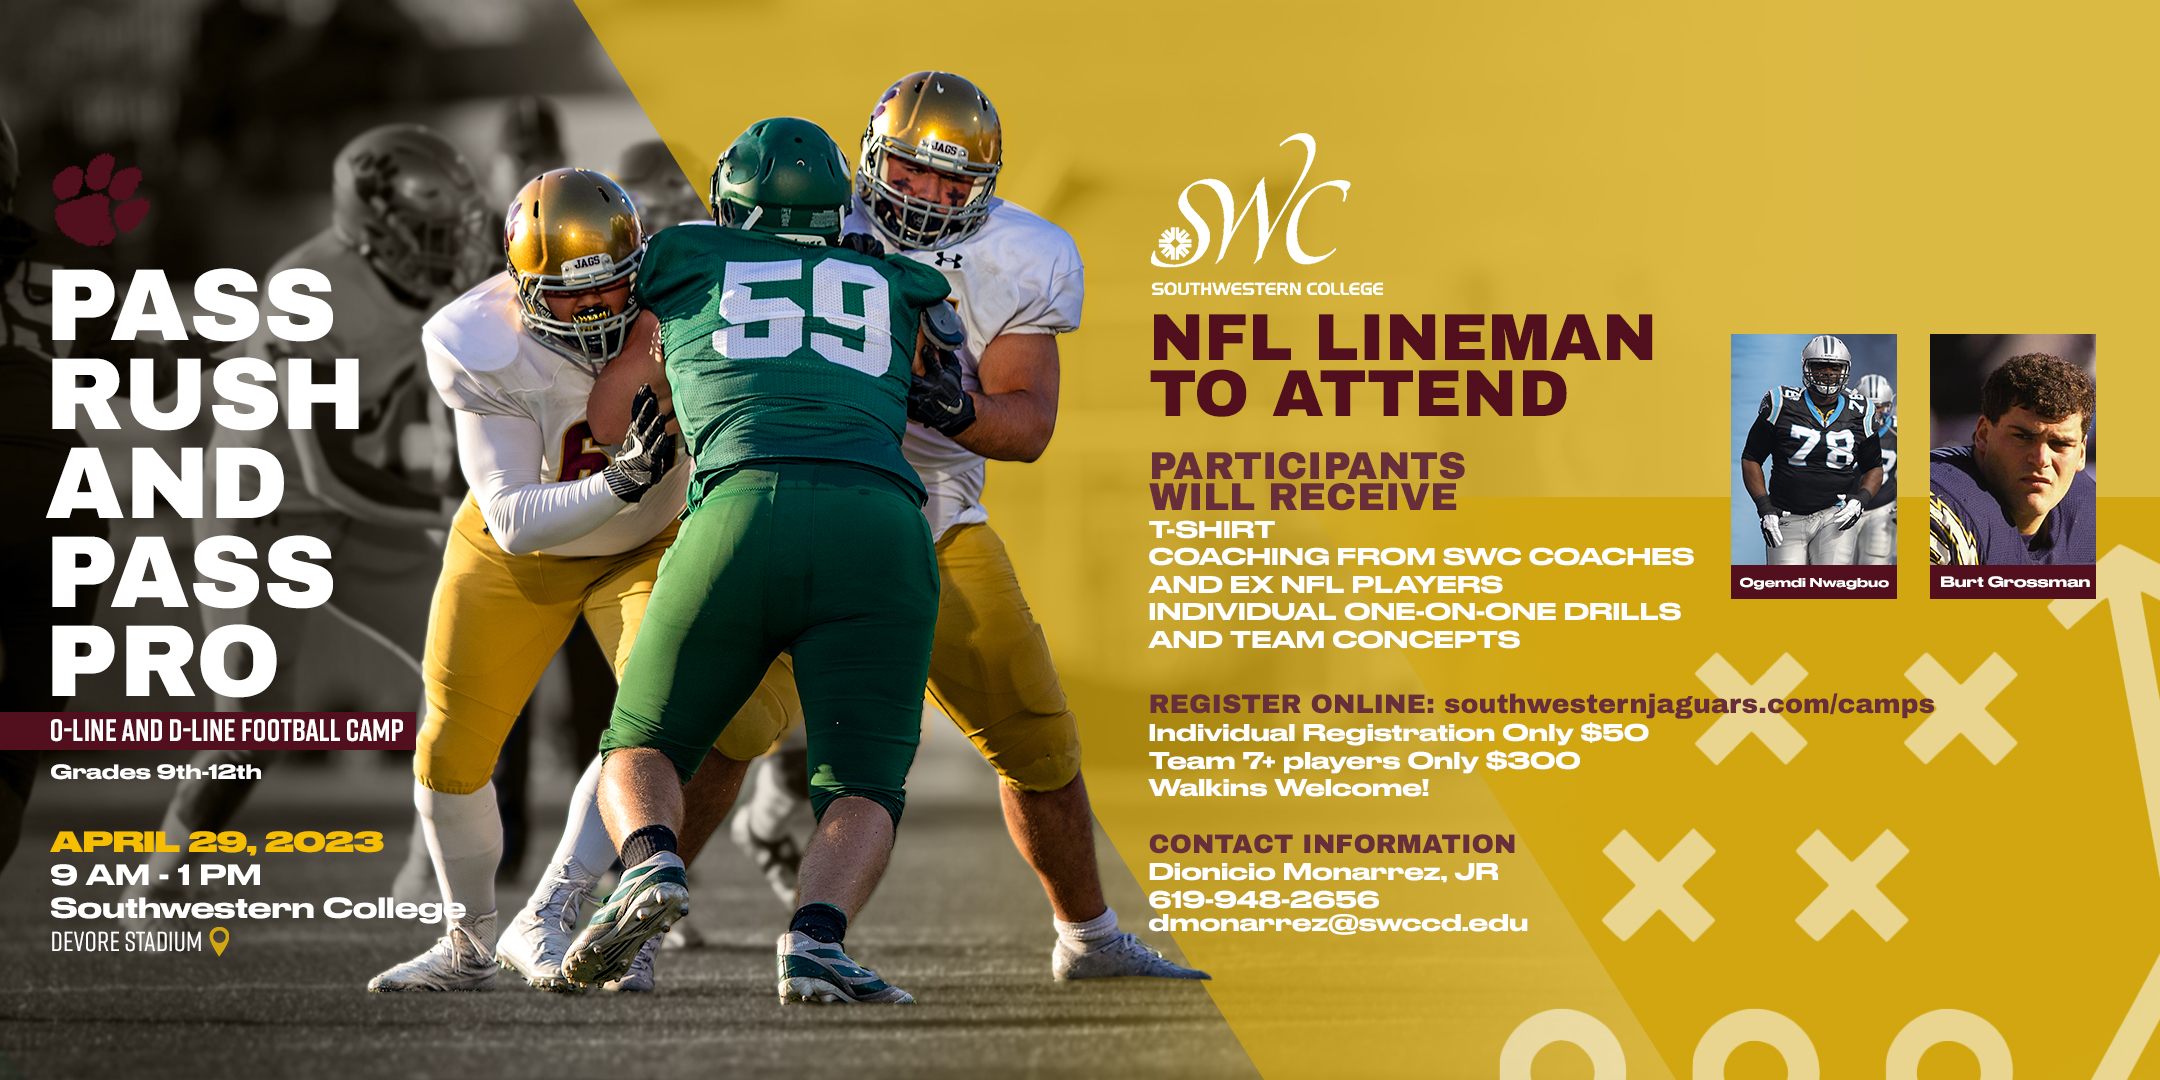 Football Clinic for OL/DL - Pass Rush & Pass Pro